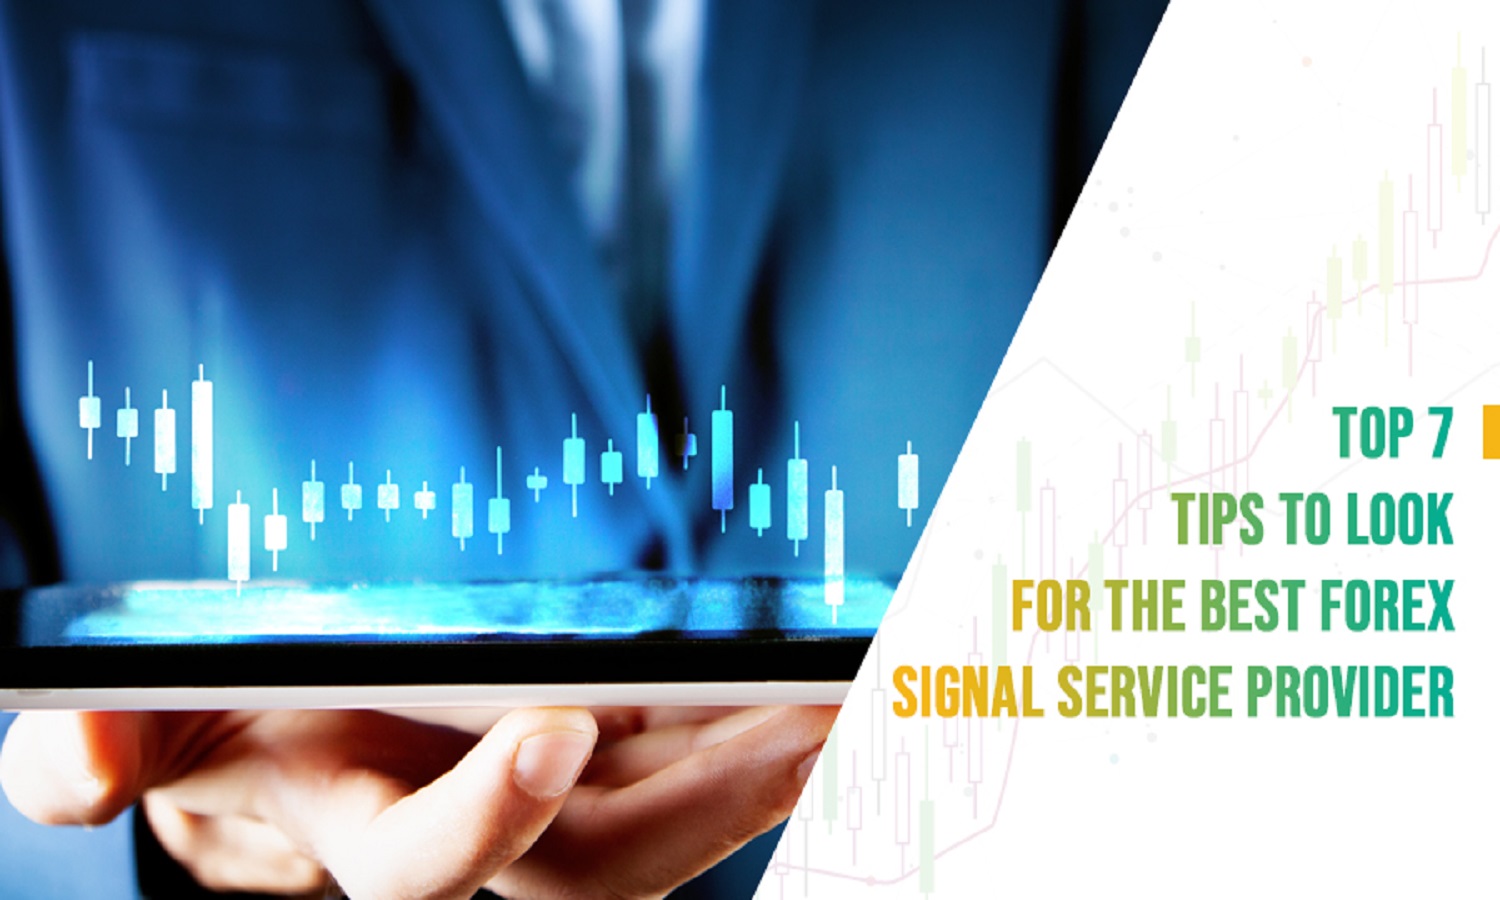 Top 7 Tips to Look For the Best Forex Signal Service Provider